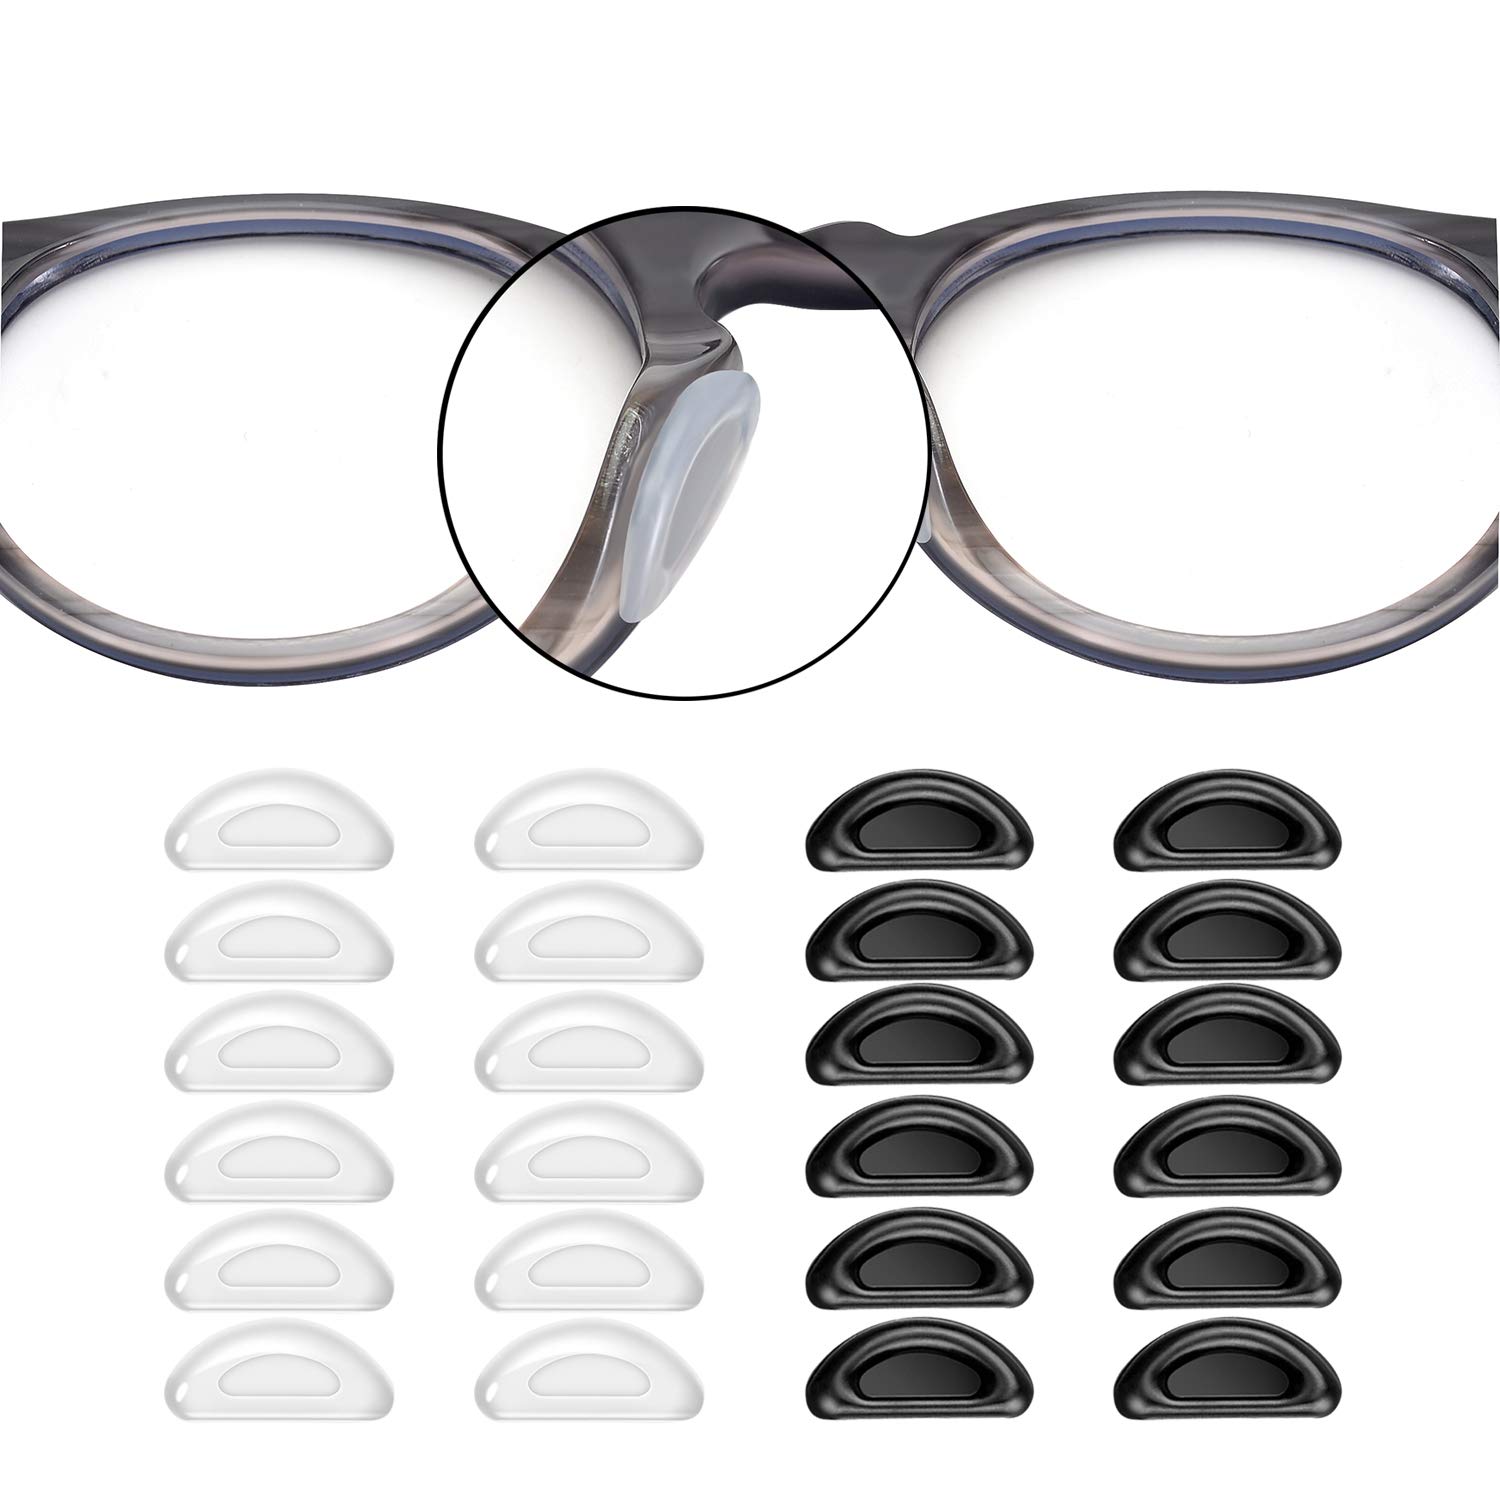 5 Pairs Anti-Slip Silicone Nose Pads for Eyewear - Stick-On Comfort Pads  for Glasses and Sunglasses TIKA